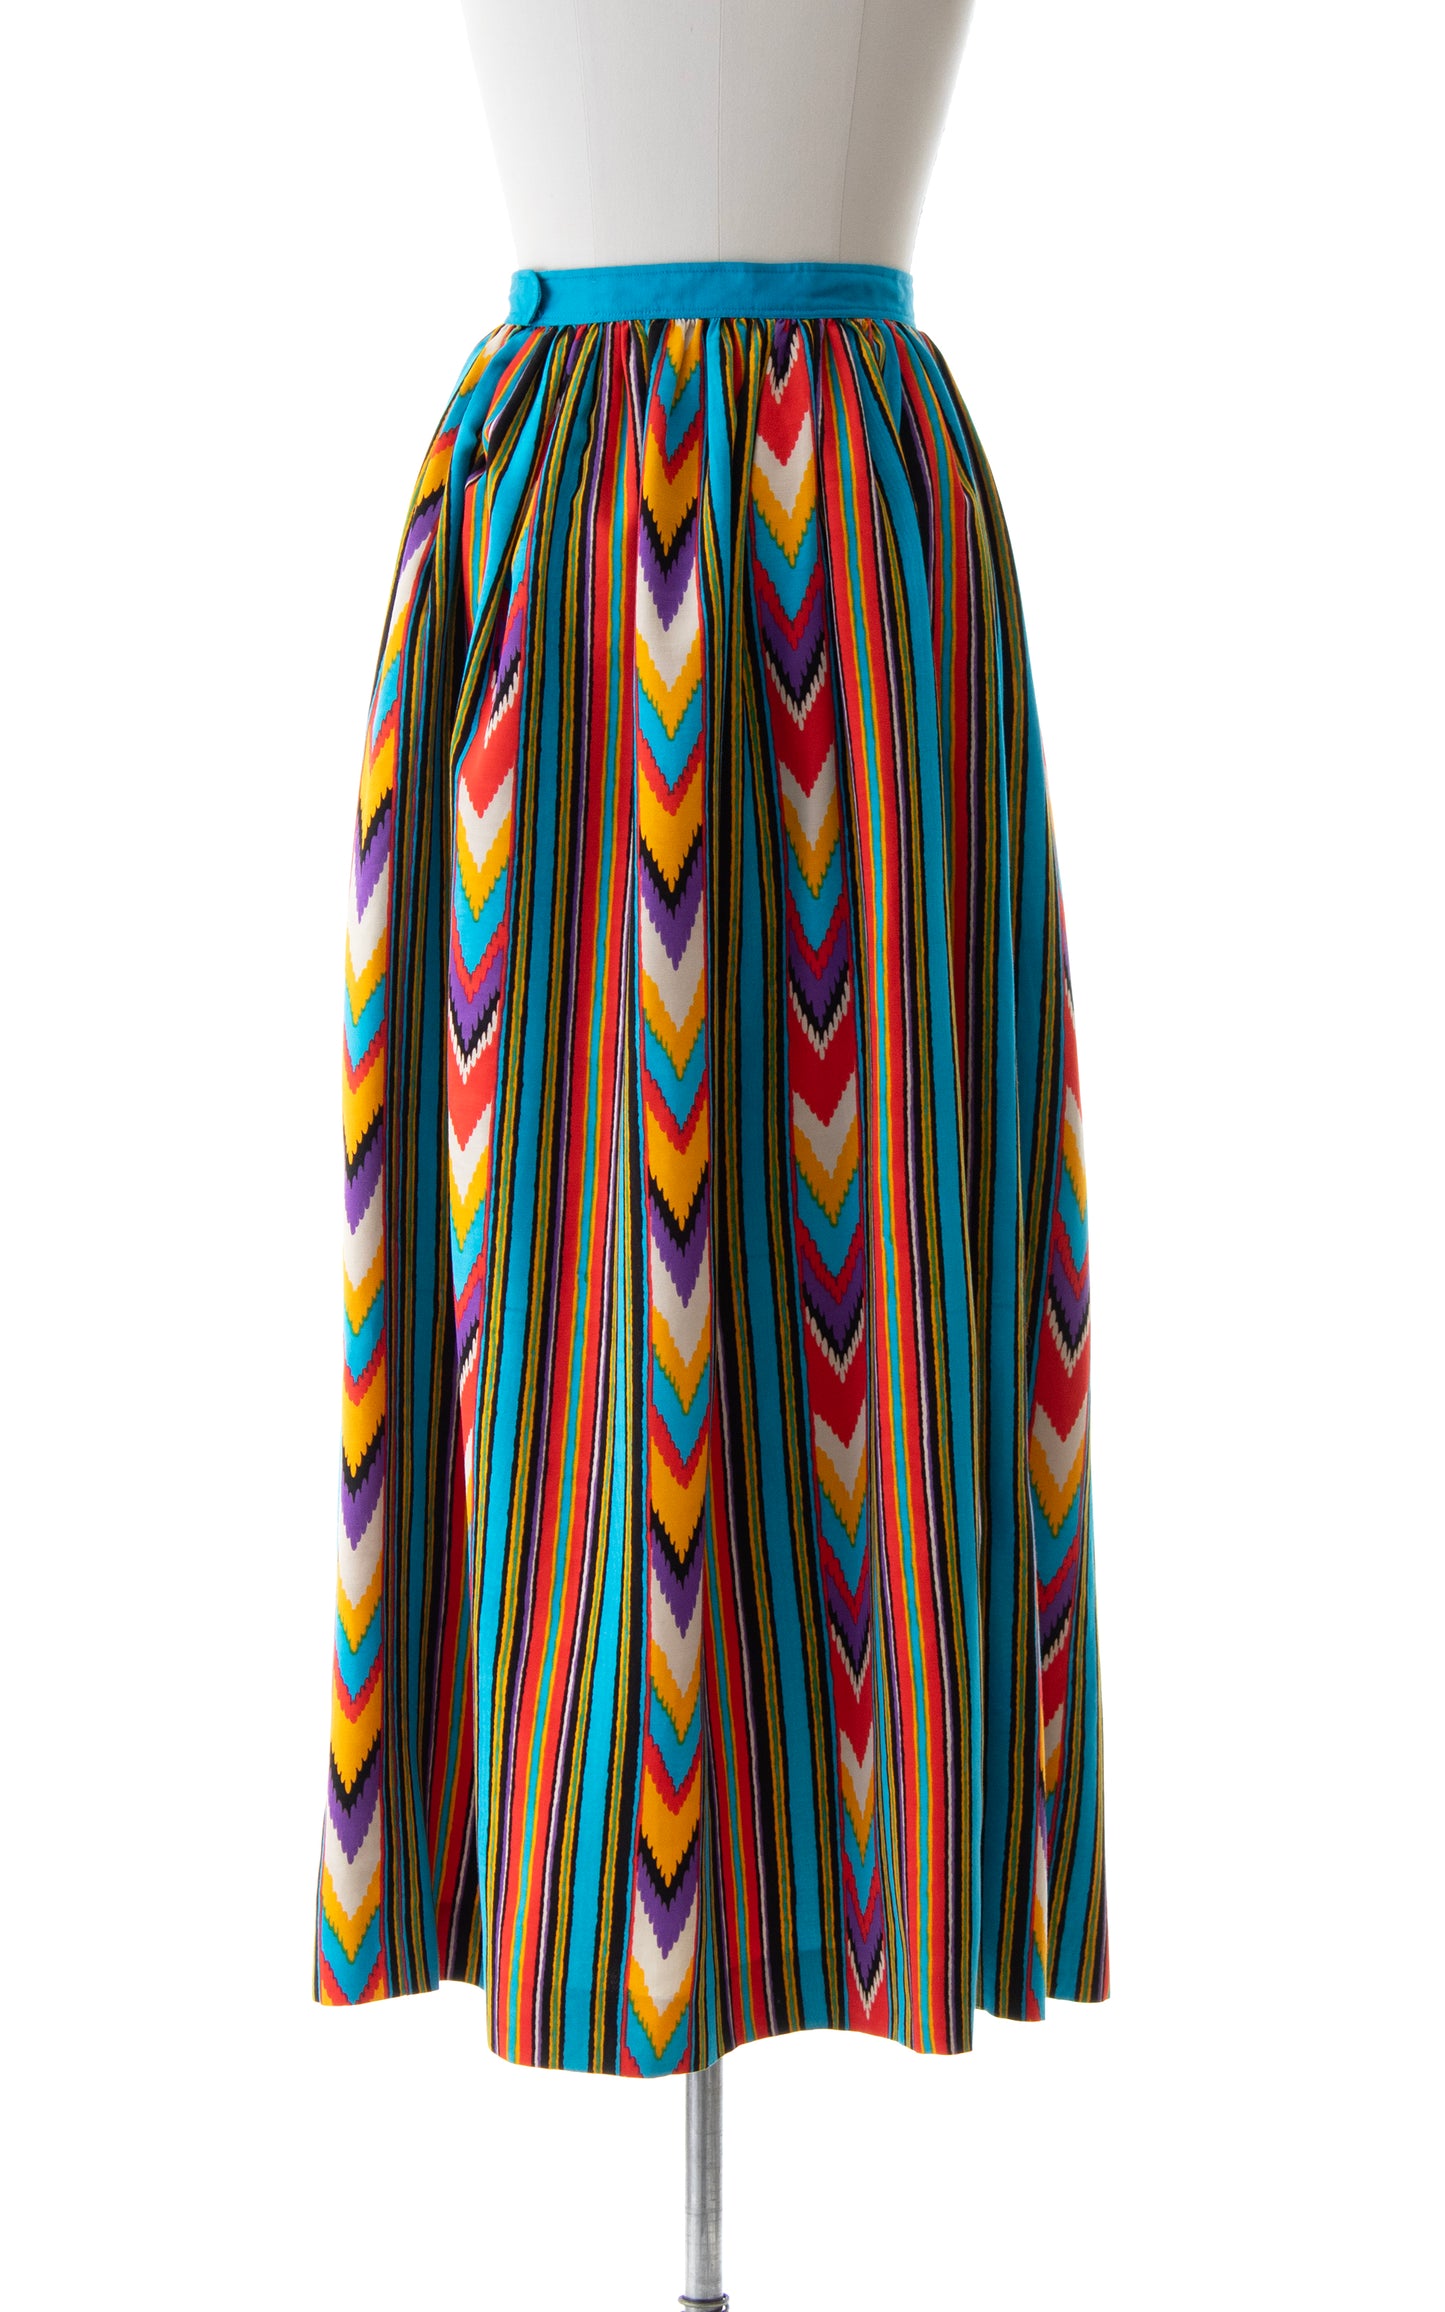 1970s Chevron Striped Rayon Faille Maxi Skirt with Pockets | small